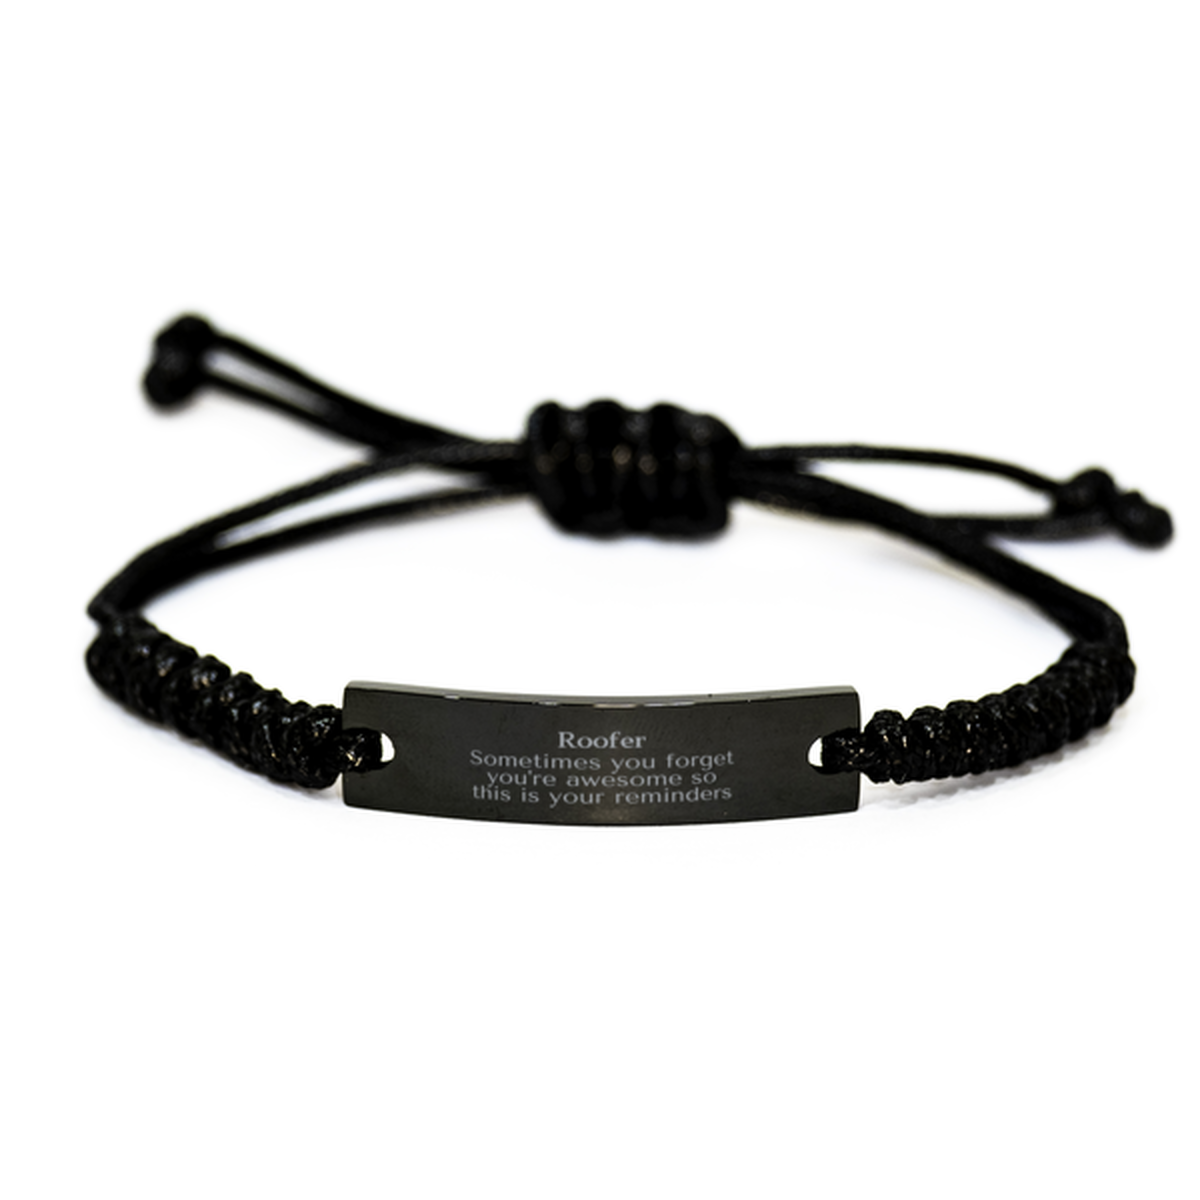 Sentimental Roofer Black Rope Bracelet, Roofer Sometimes you forget you're awesome so this is your reminders, Graduation Christmas Birthday Gifts for Roofer, Men, Women, Coworkers